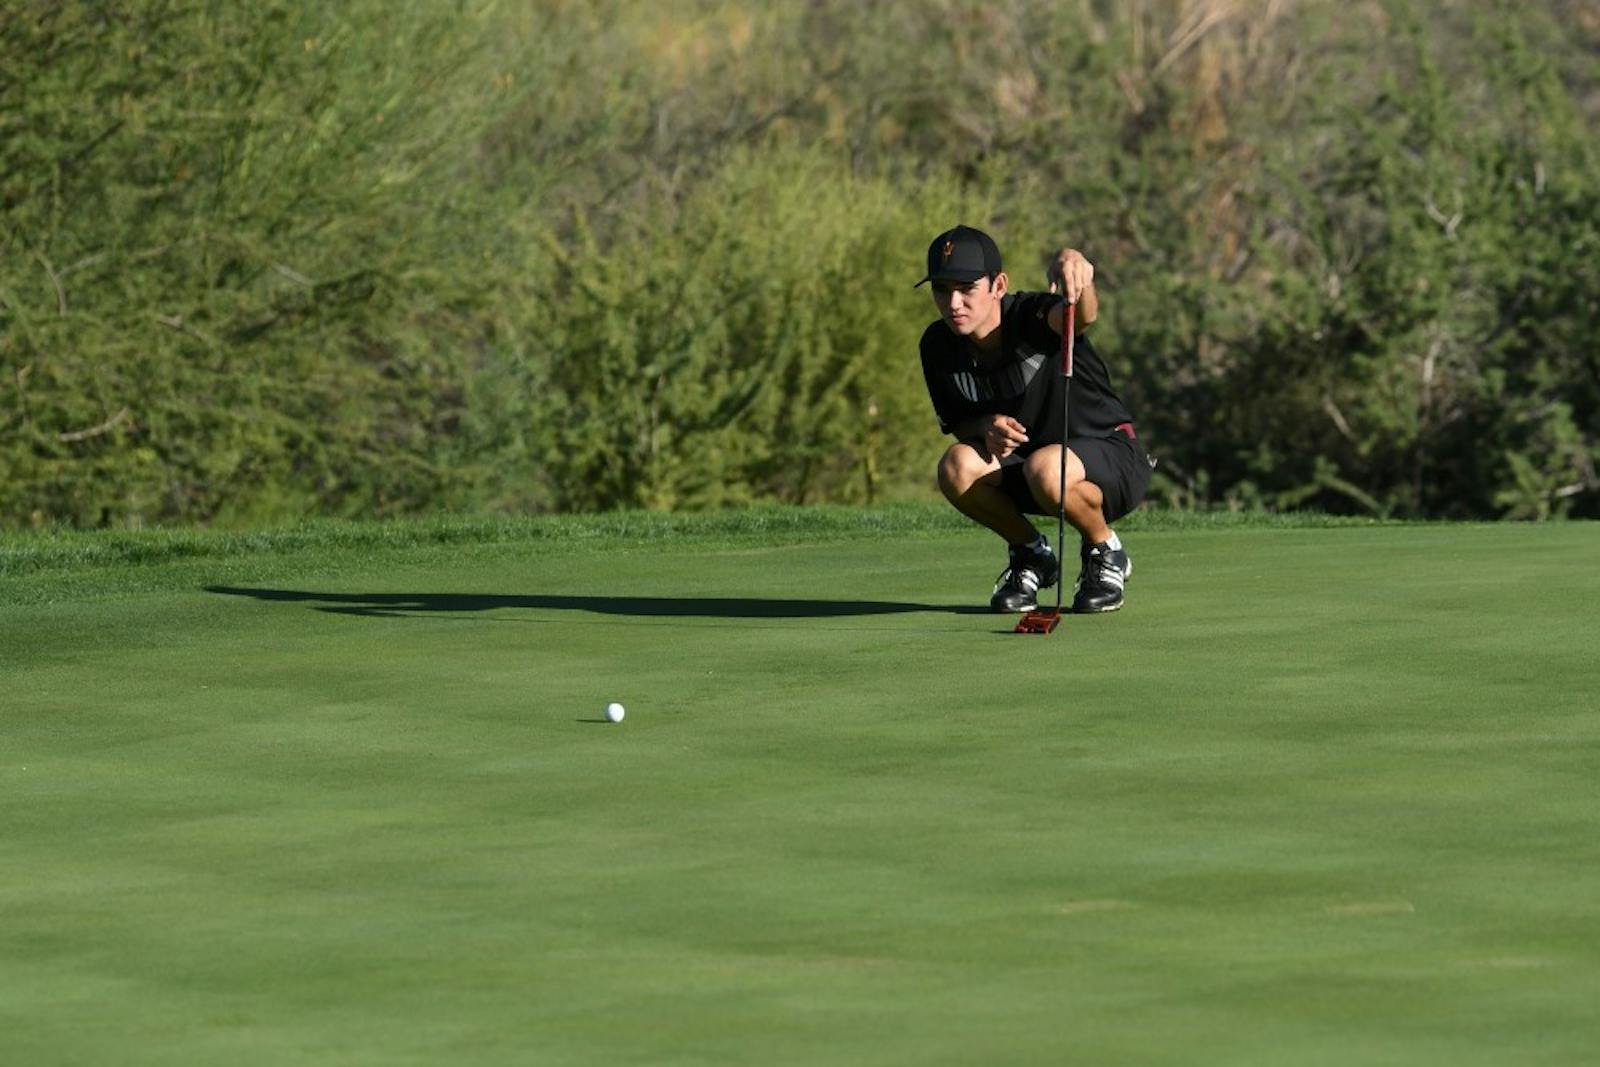 ASU men's golf ties for second place at Southwestern Invitational The